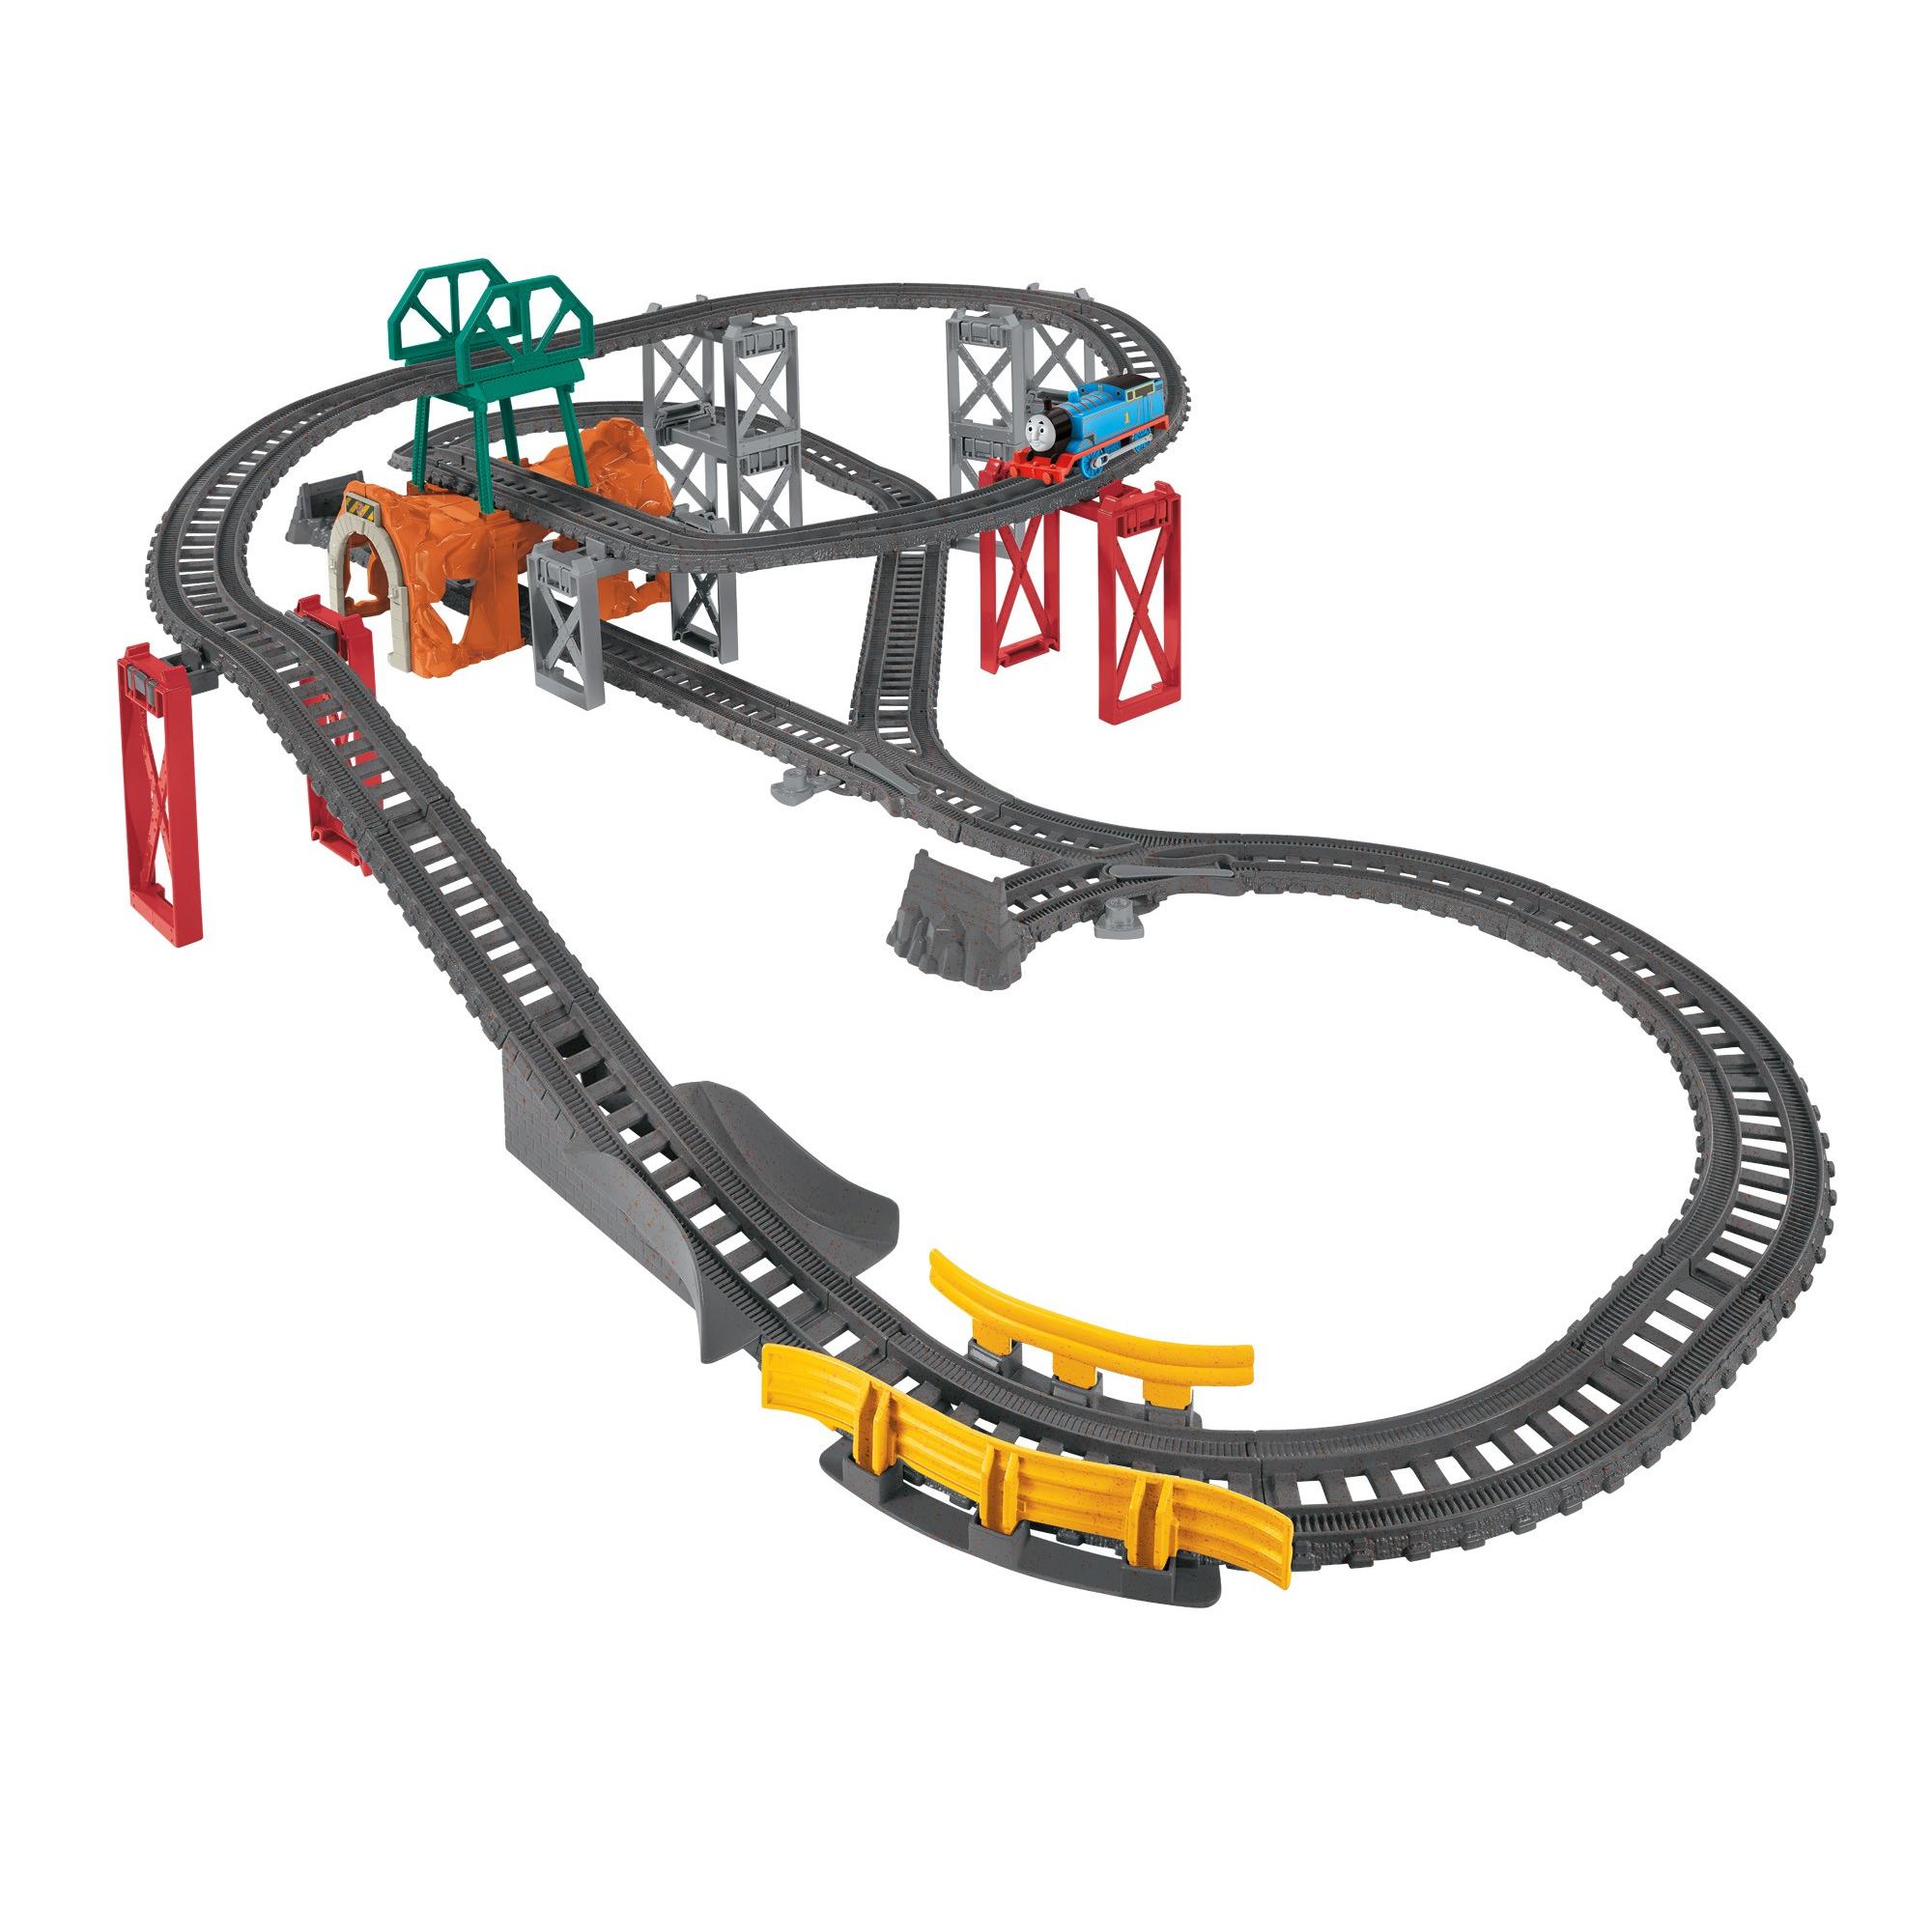 Thomas & Friends TrackMaster 5-in-1 Track Builder Set - image 4 of 7